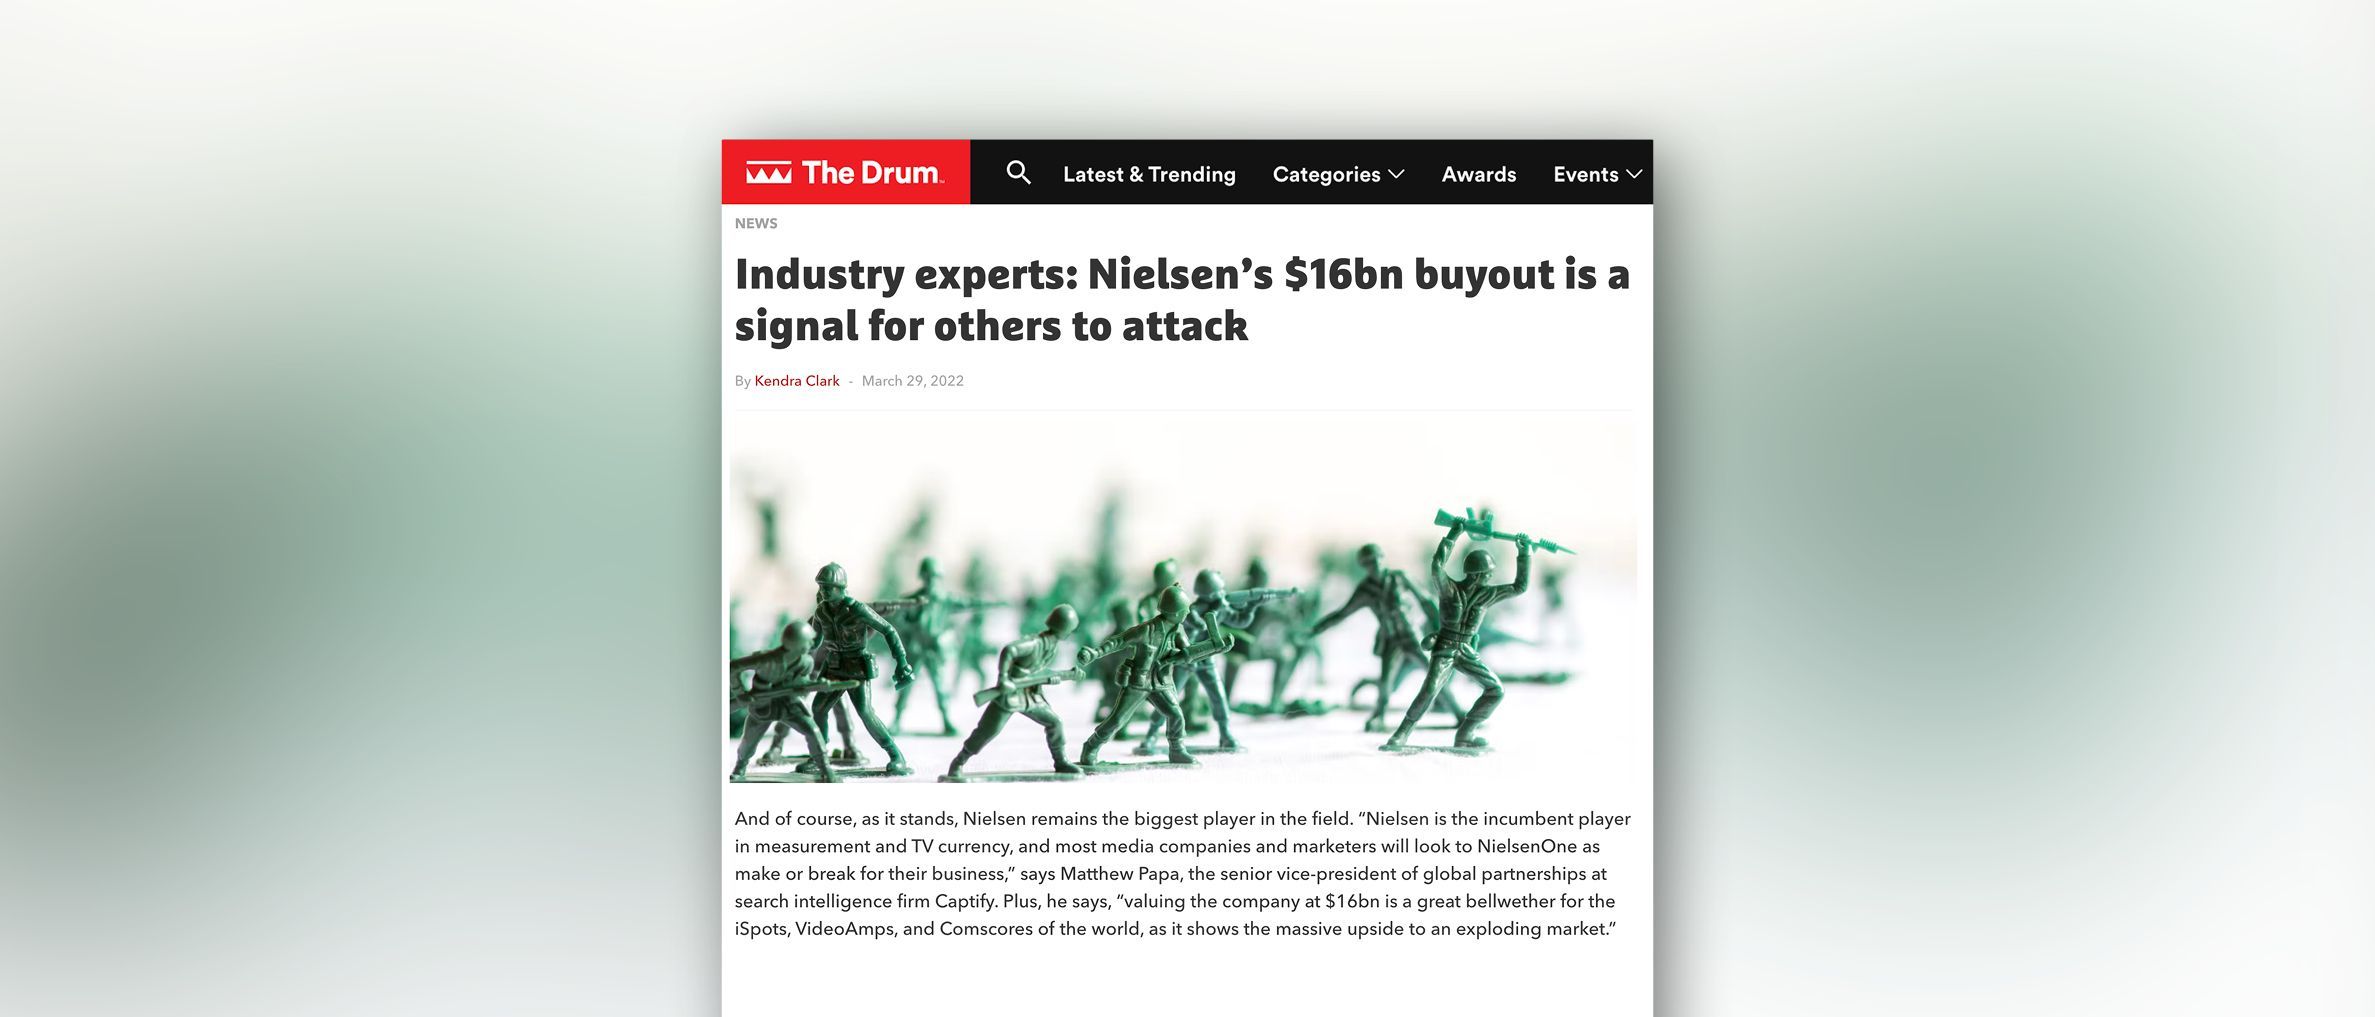 The Drum: Industry Experts—Nielsen’s $16bn Buyout is a Signal for Others to Attack